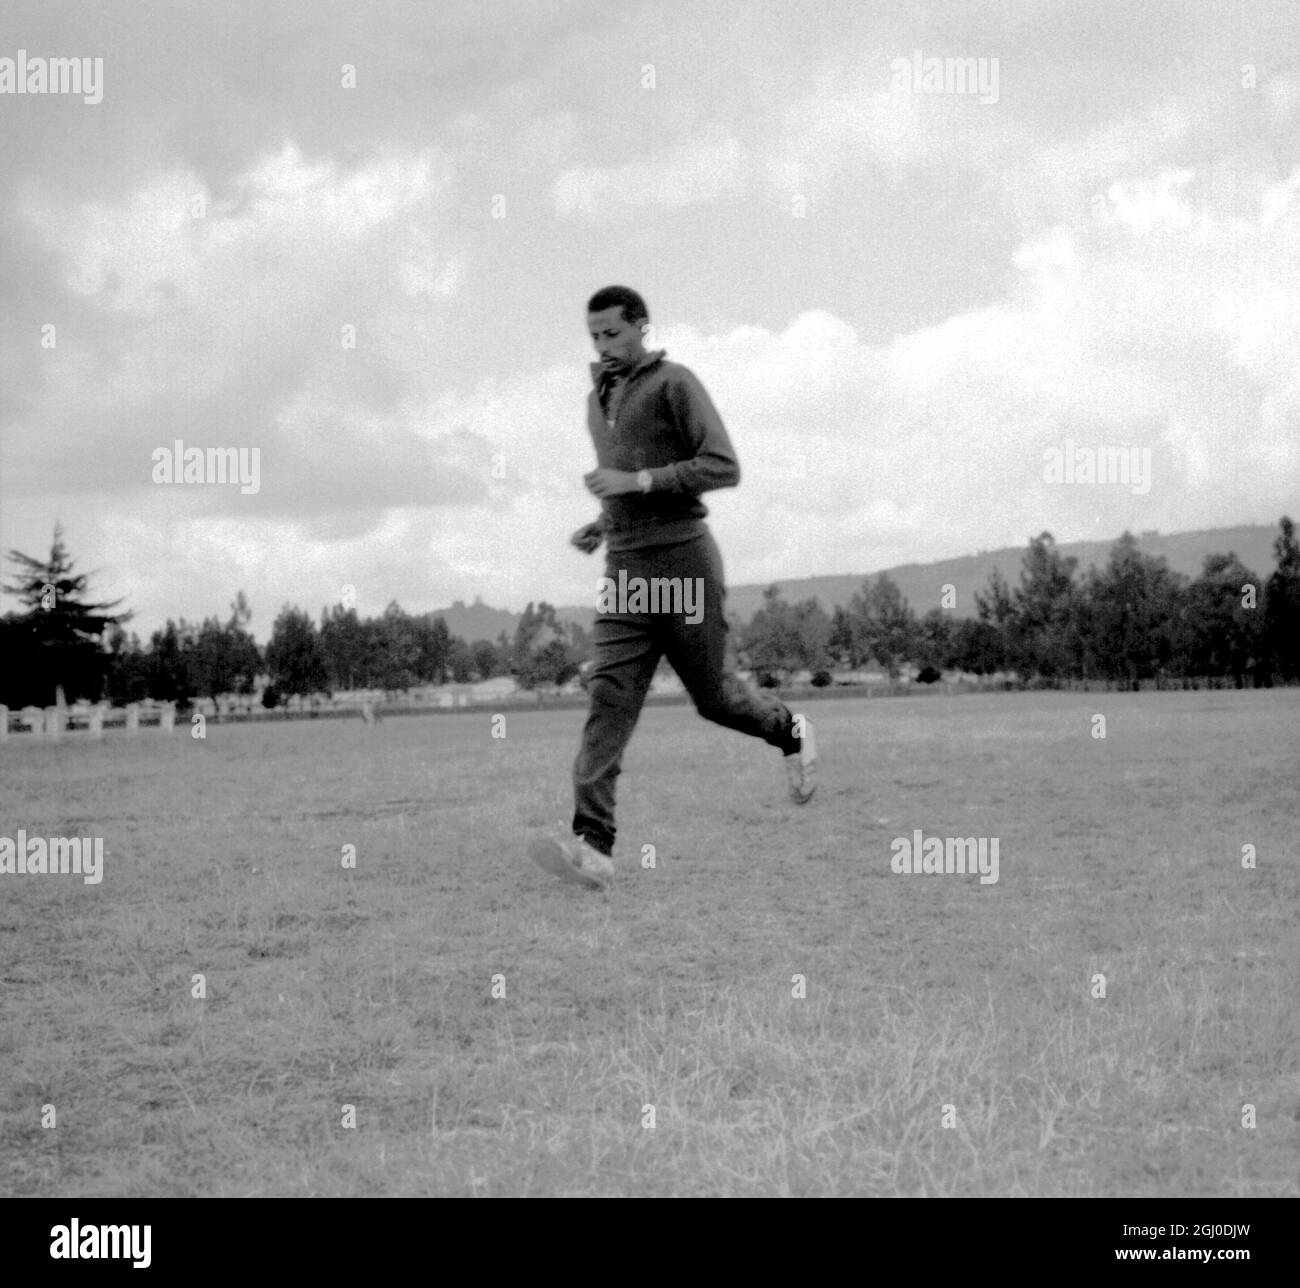 Addis Ababa, Ethiopia. Olympic games marathon winner in Rome, 1960, Ethiopia's Abebe Bikila is pictured during training in readiness for next year's Tokyo games. 5th December 1963 Stock Photo